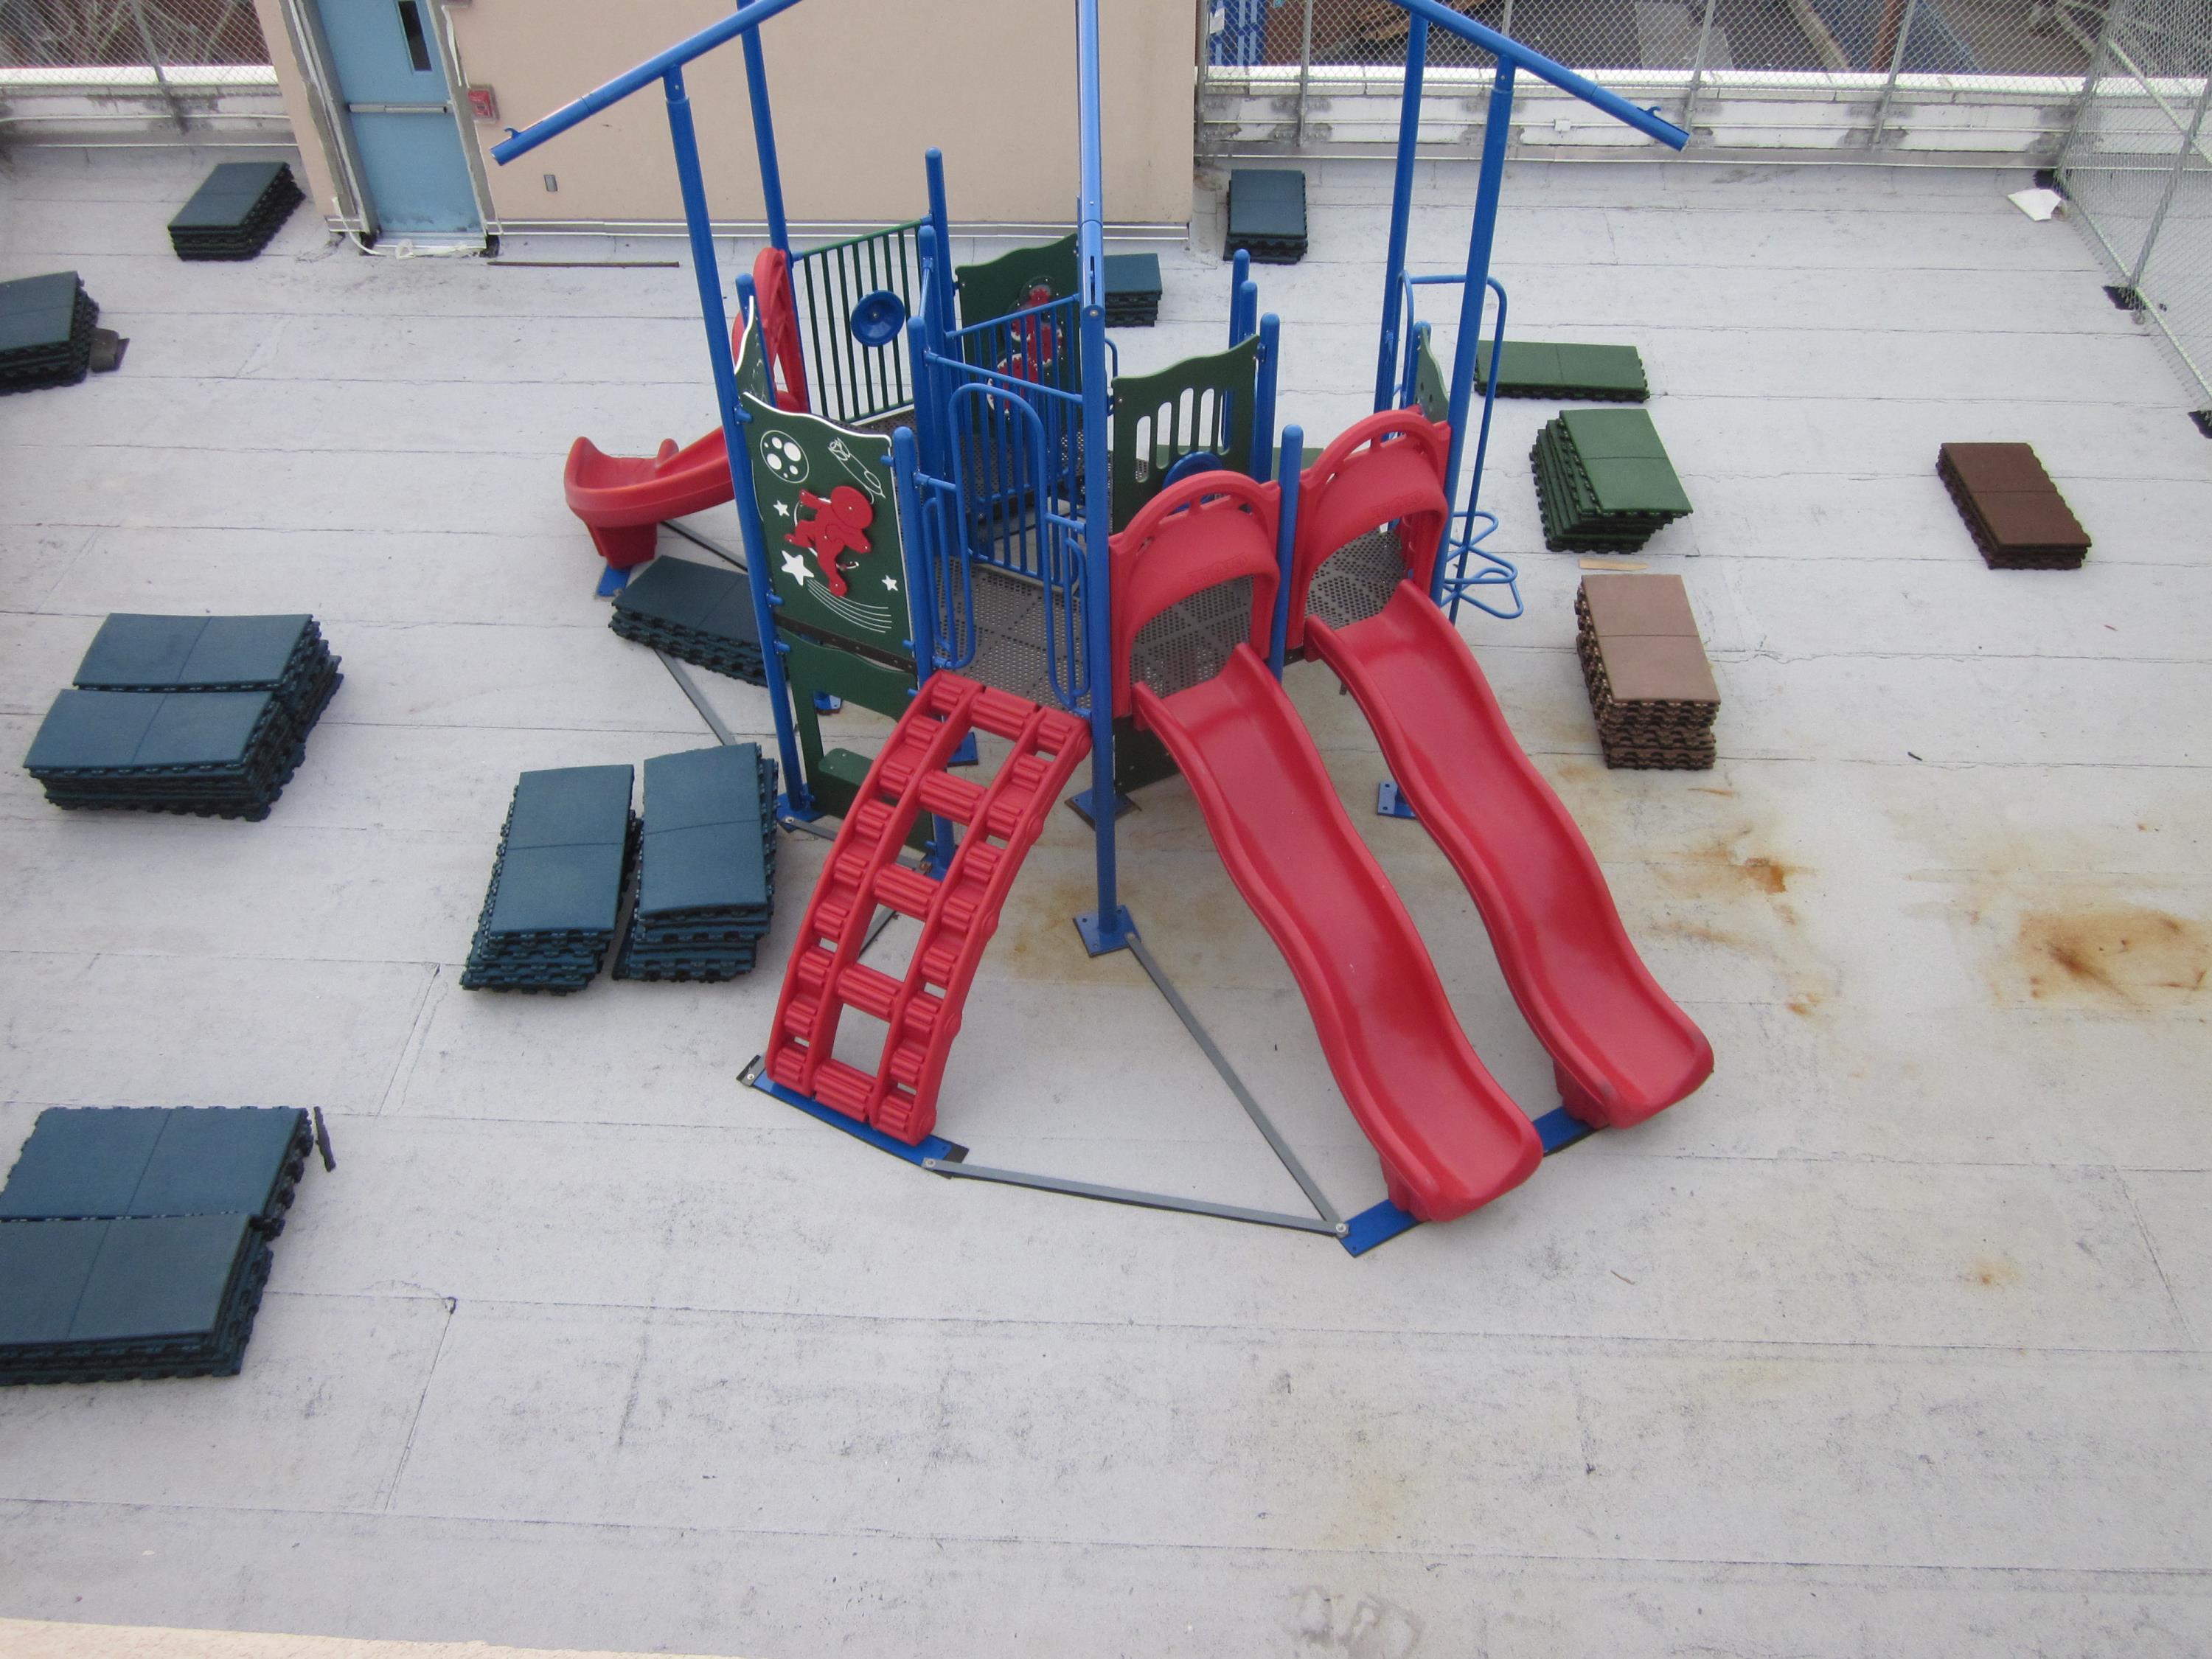 Rooftop Playground With Equipment for 2-5 g